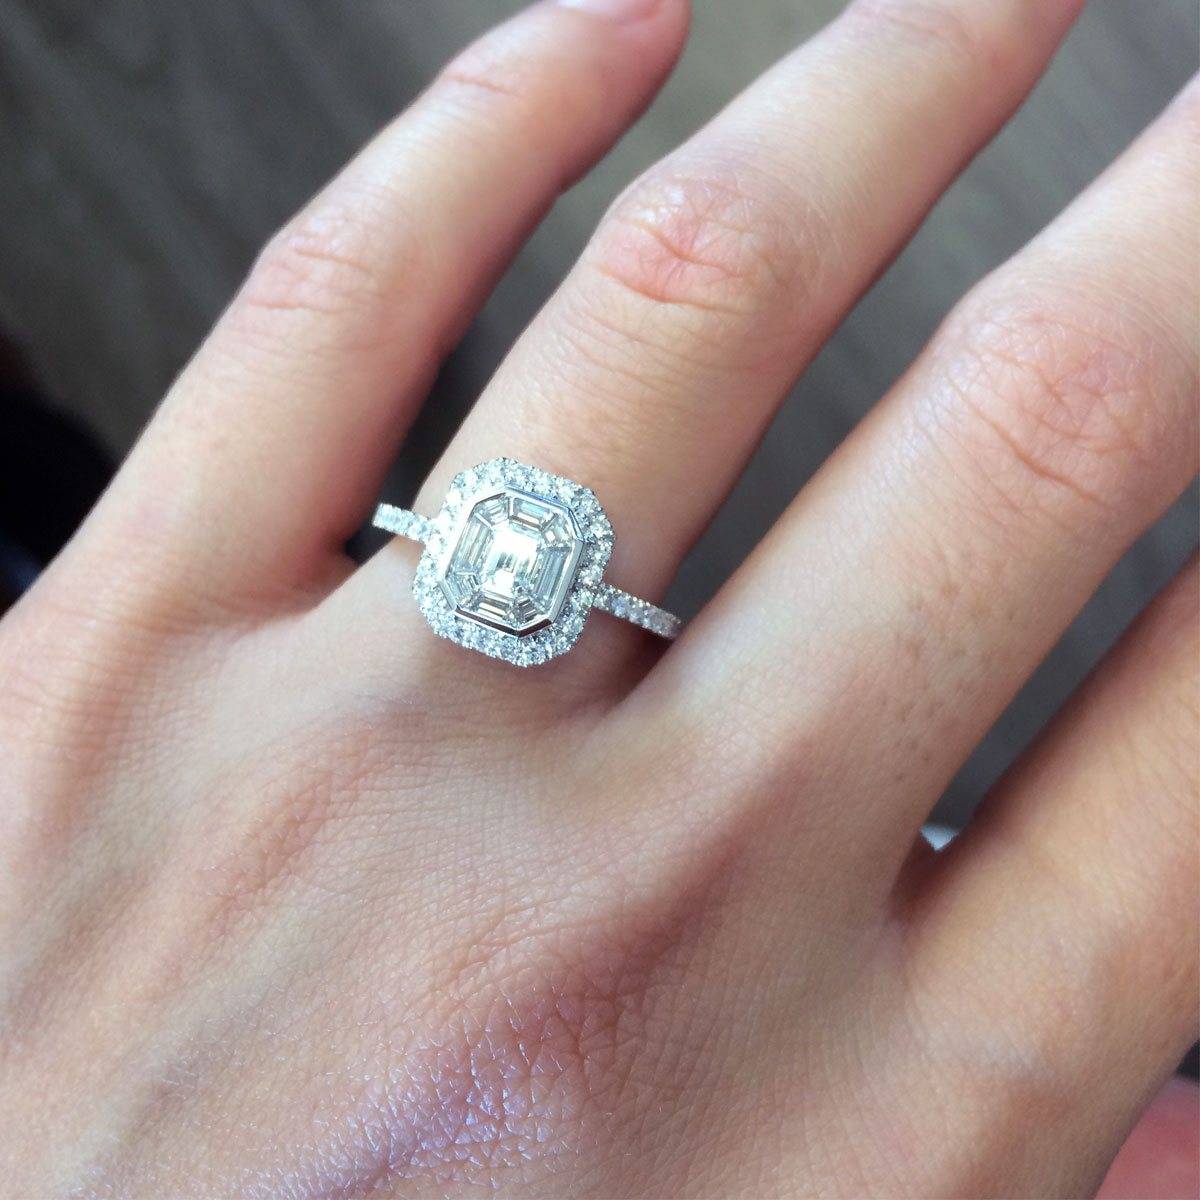 This Art Deco style halo engagement ring is perfect for the bride looking for something alternative on a budget.